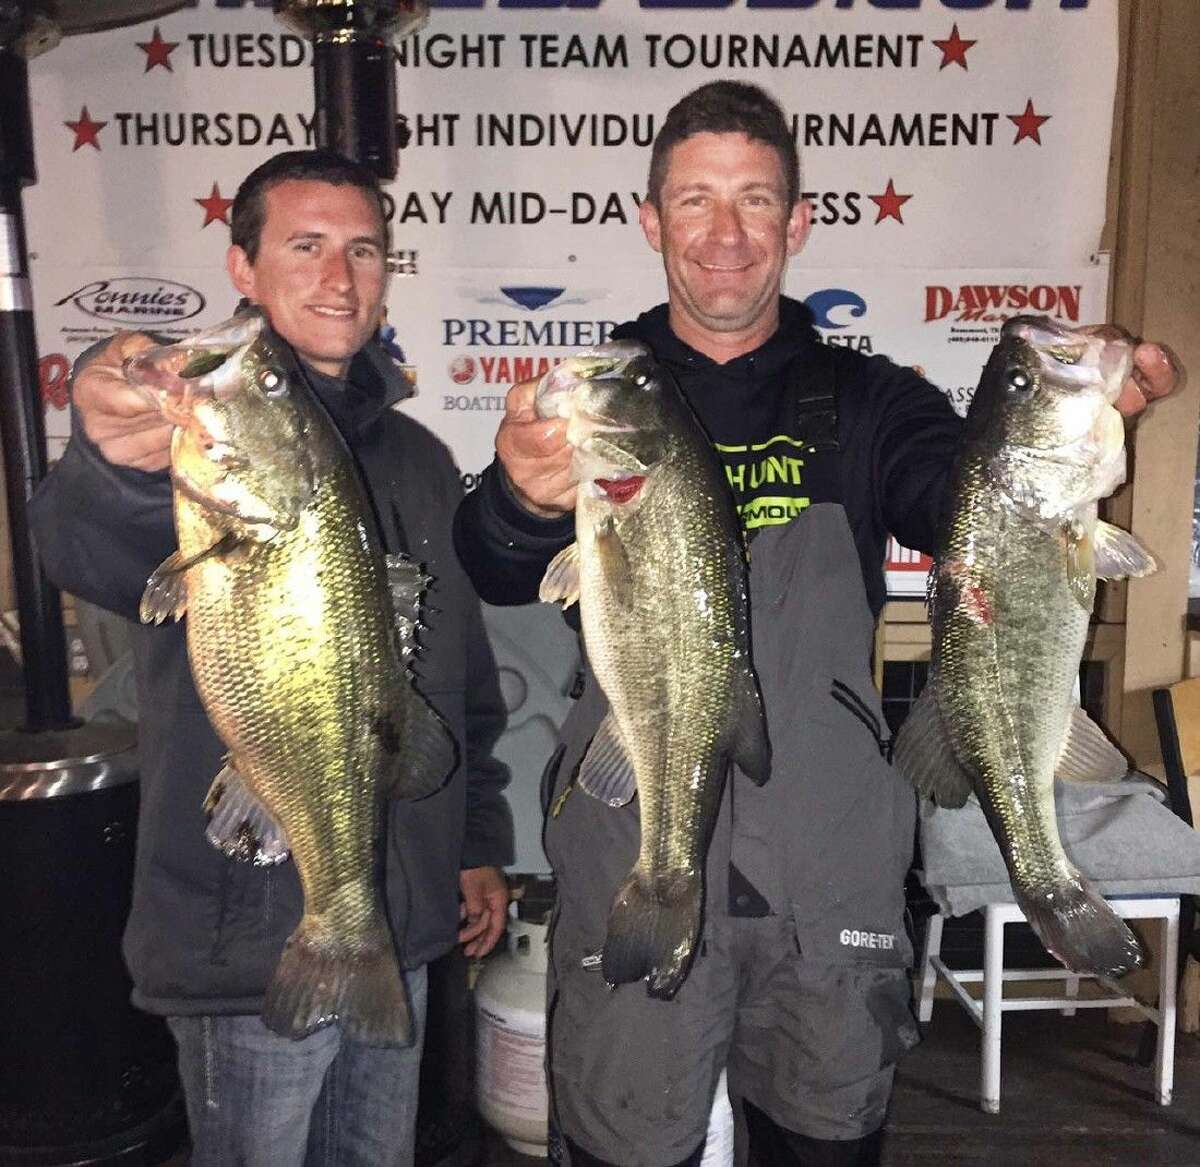 Justin Buller and Wesley Johnson came in second place in the CONROEBASS Tuesday tournament with a total stringer weight of 13.54 pounds.